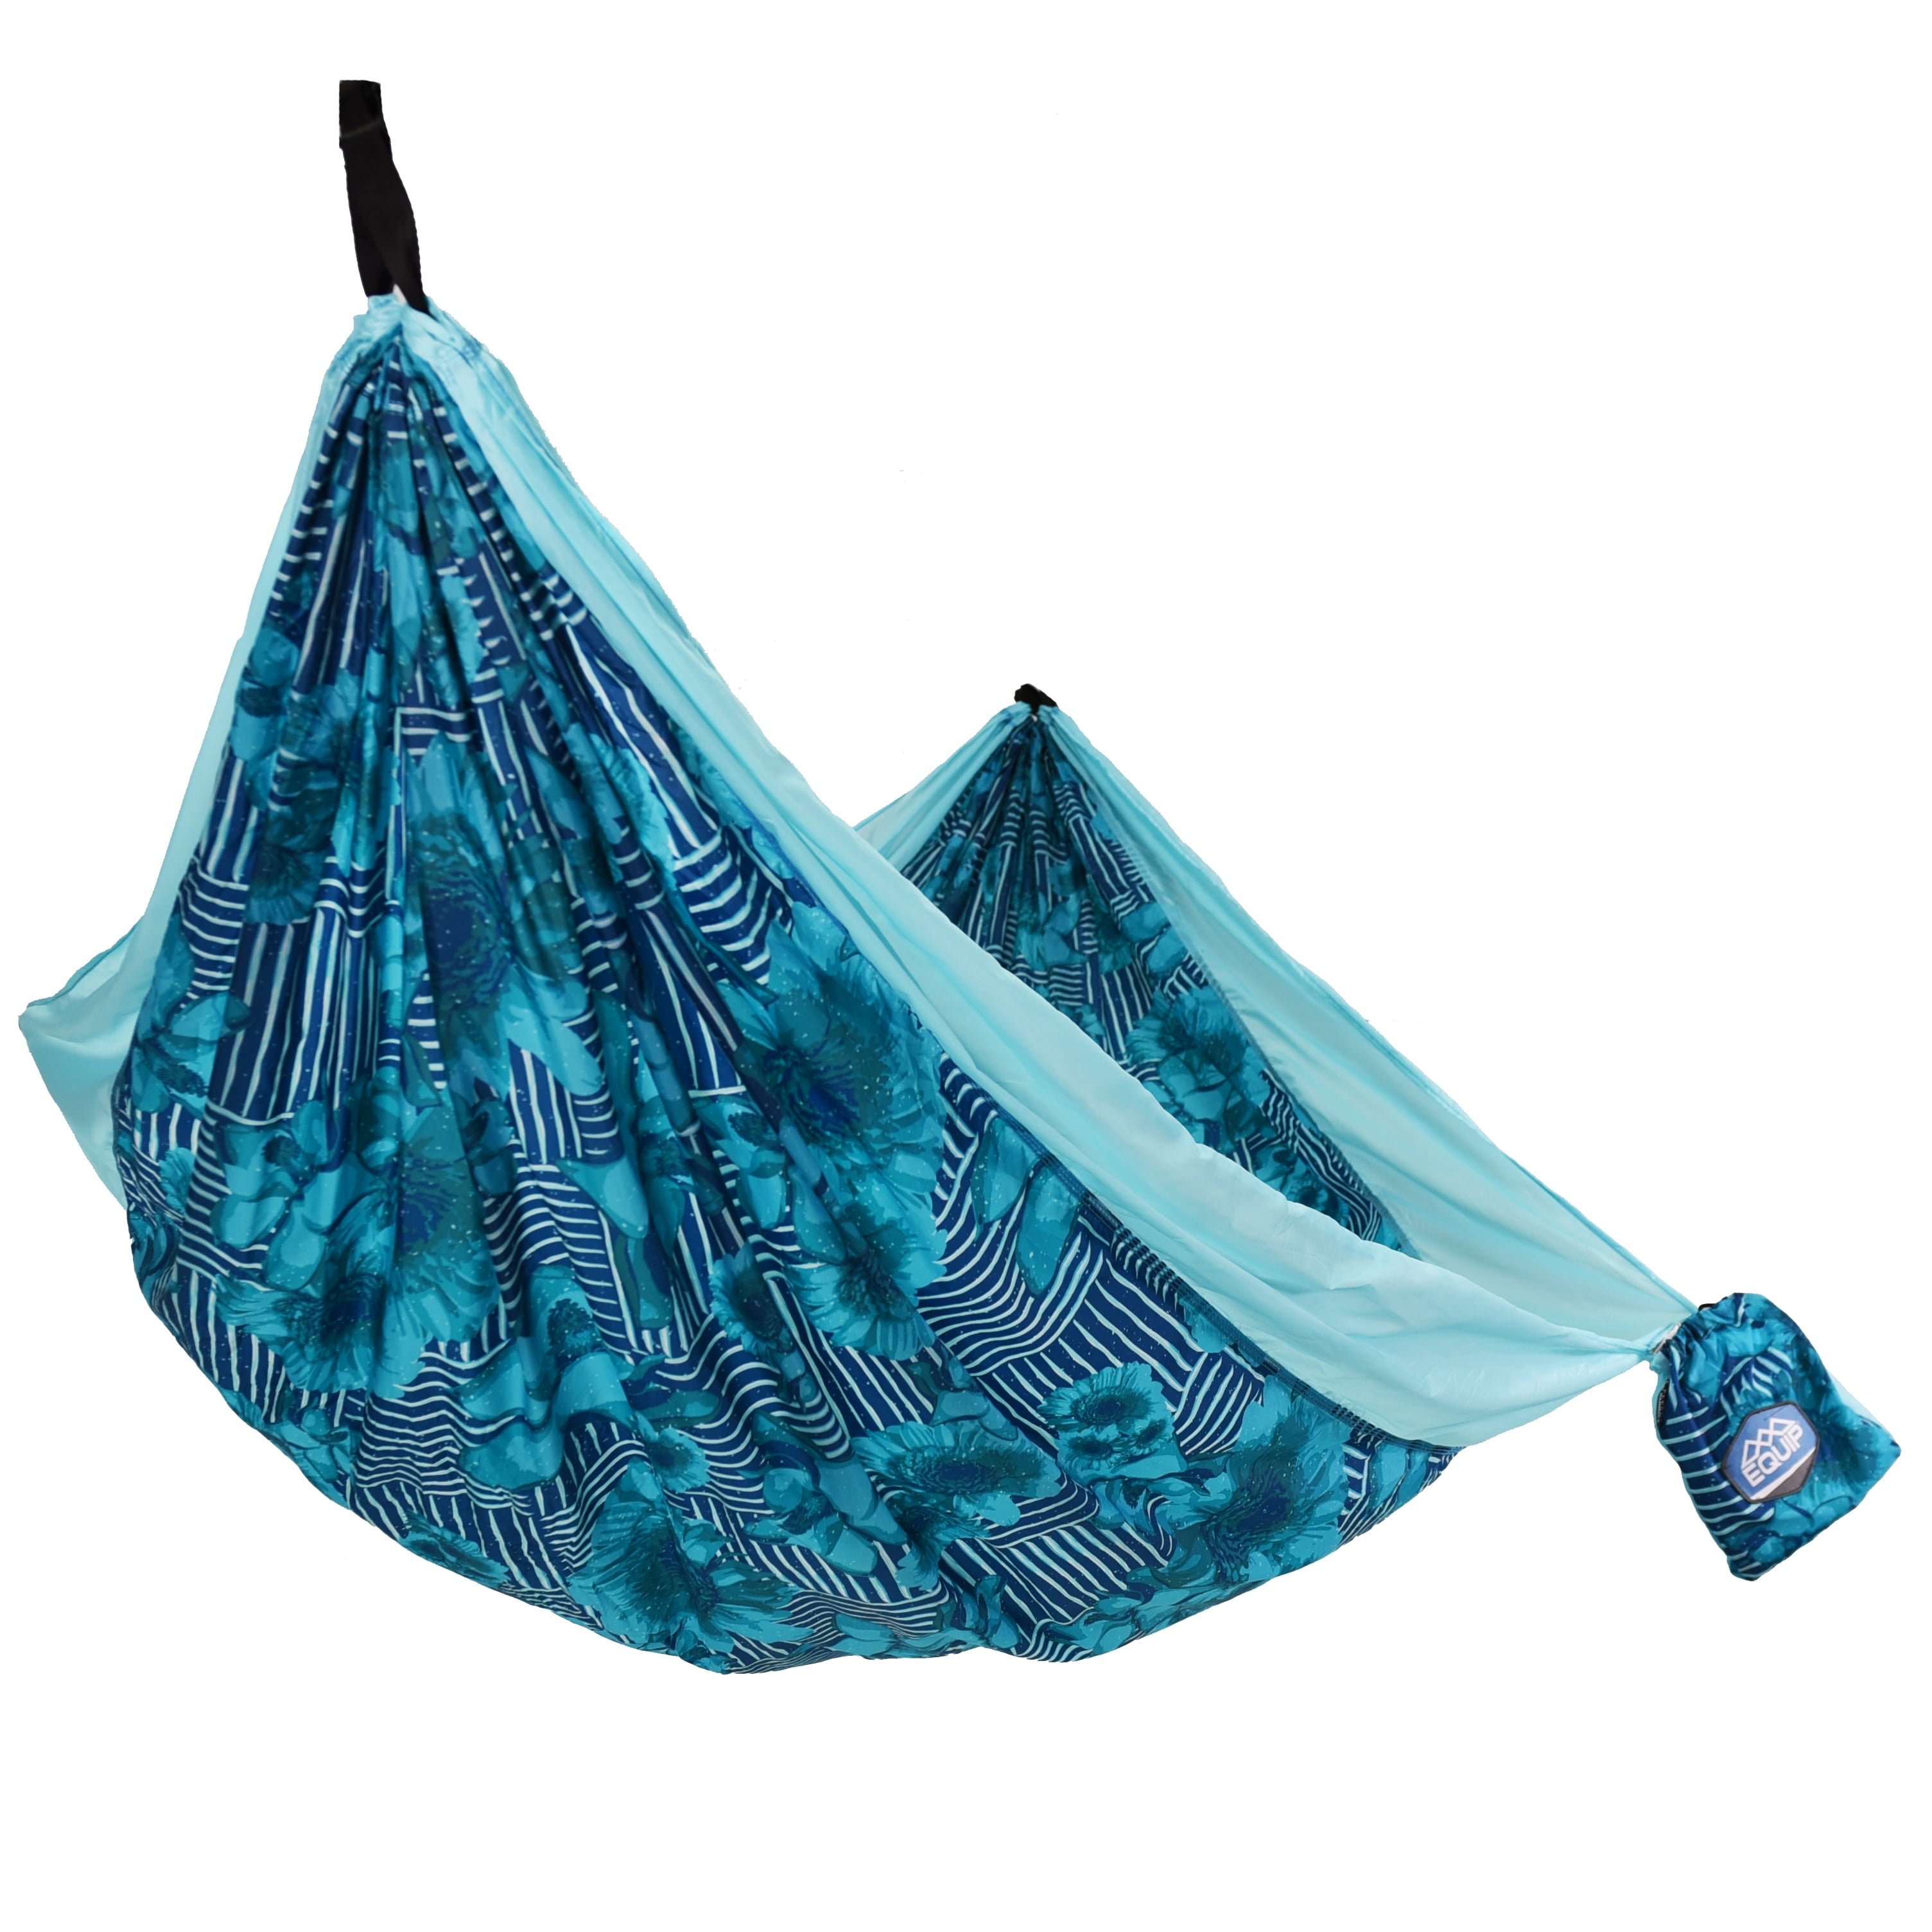 Equip Nylon Camping Travel Hammock, 2 Person, Blue Floral Pattern, Size 124' L x 77' W